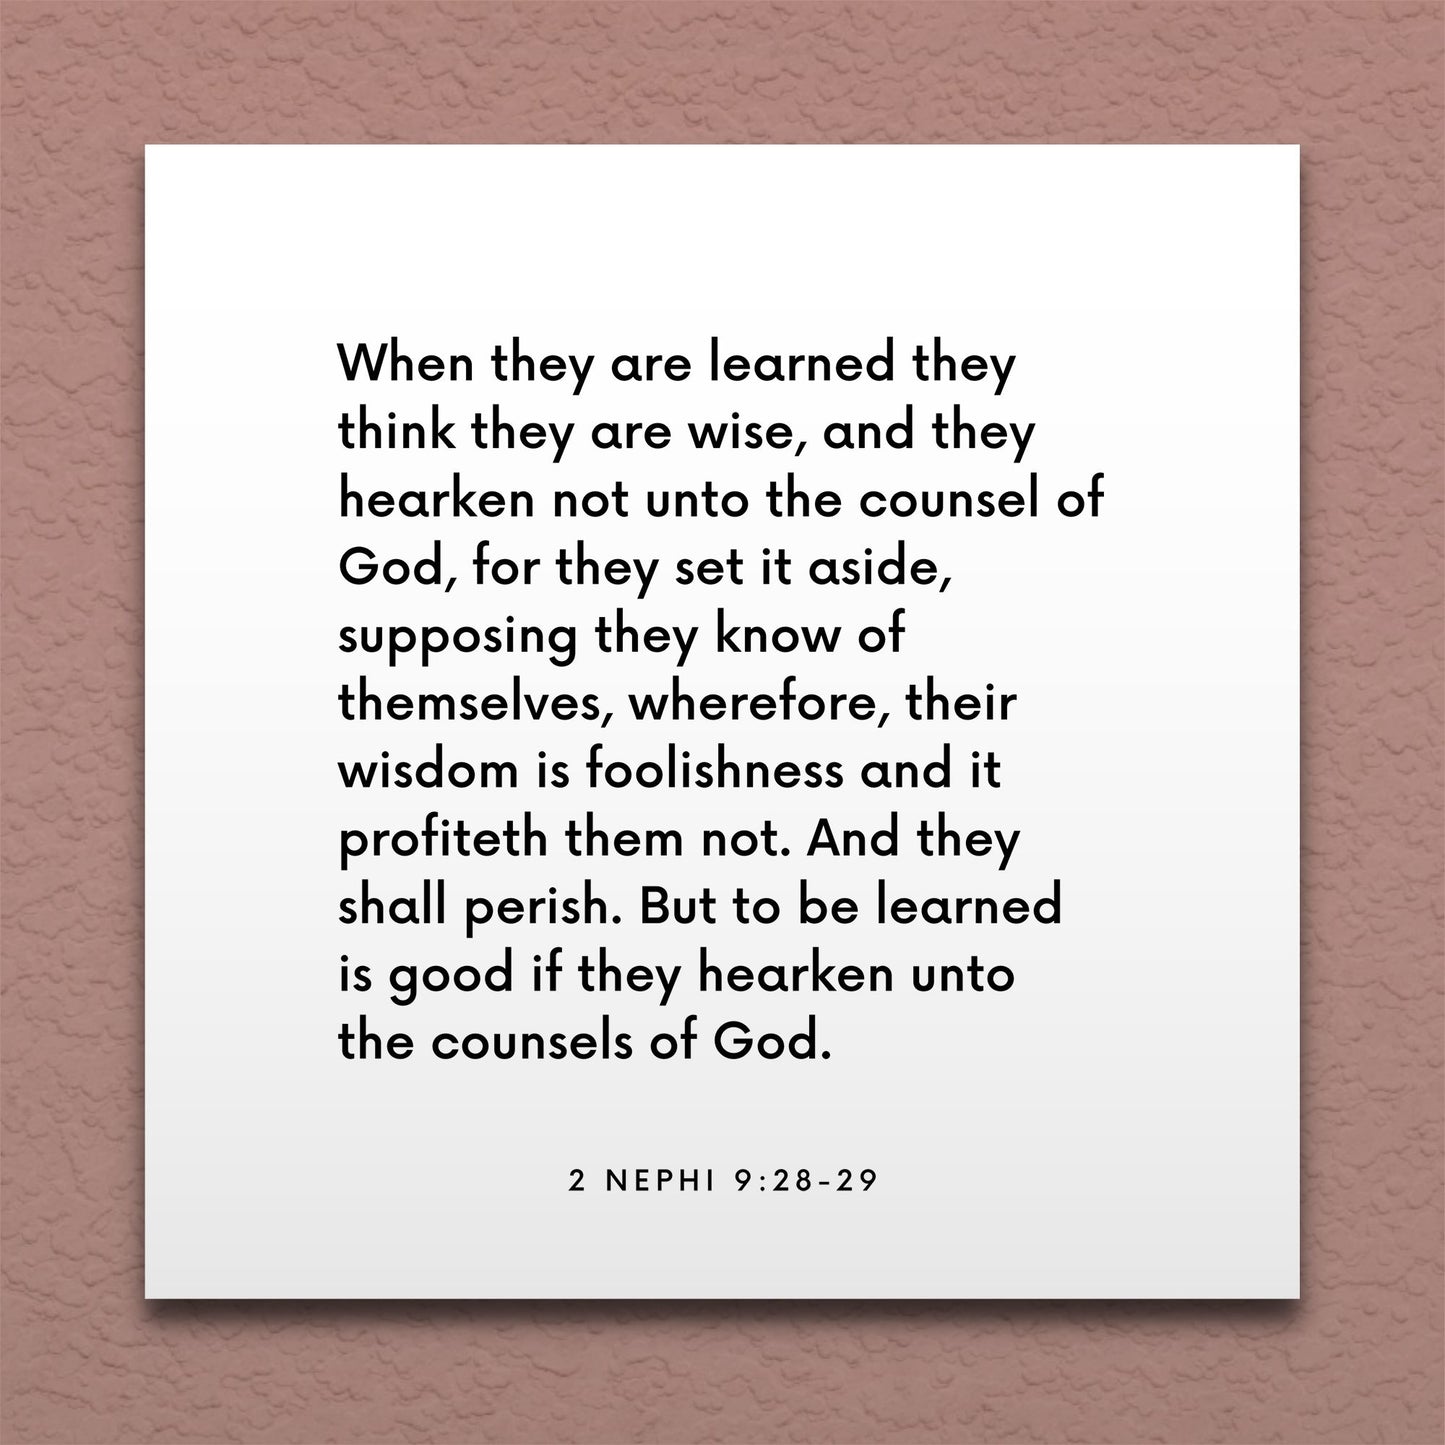 Wall-mounted scripture tile for 2 Nephi 9:28-29 - "When they are learned they think they are wise"